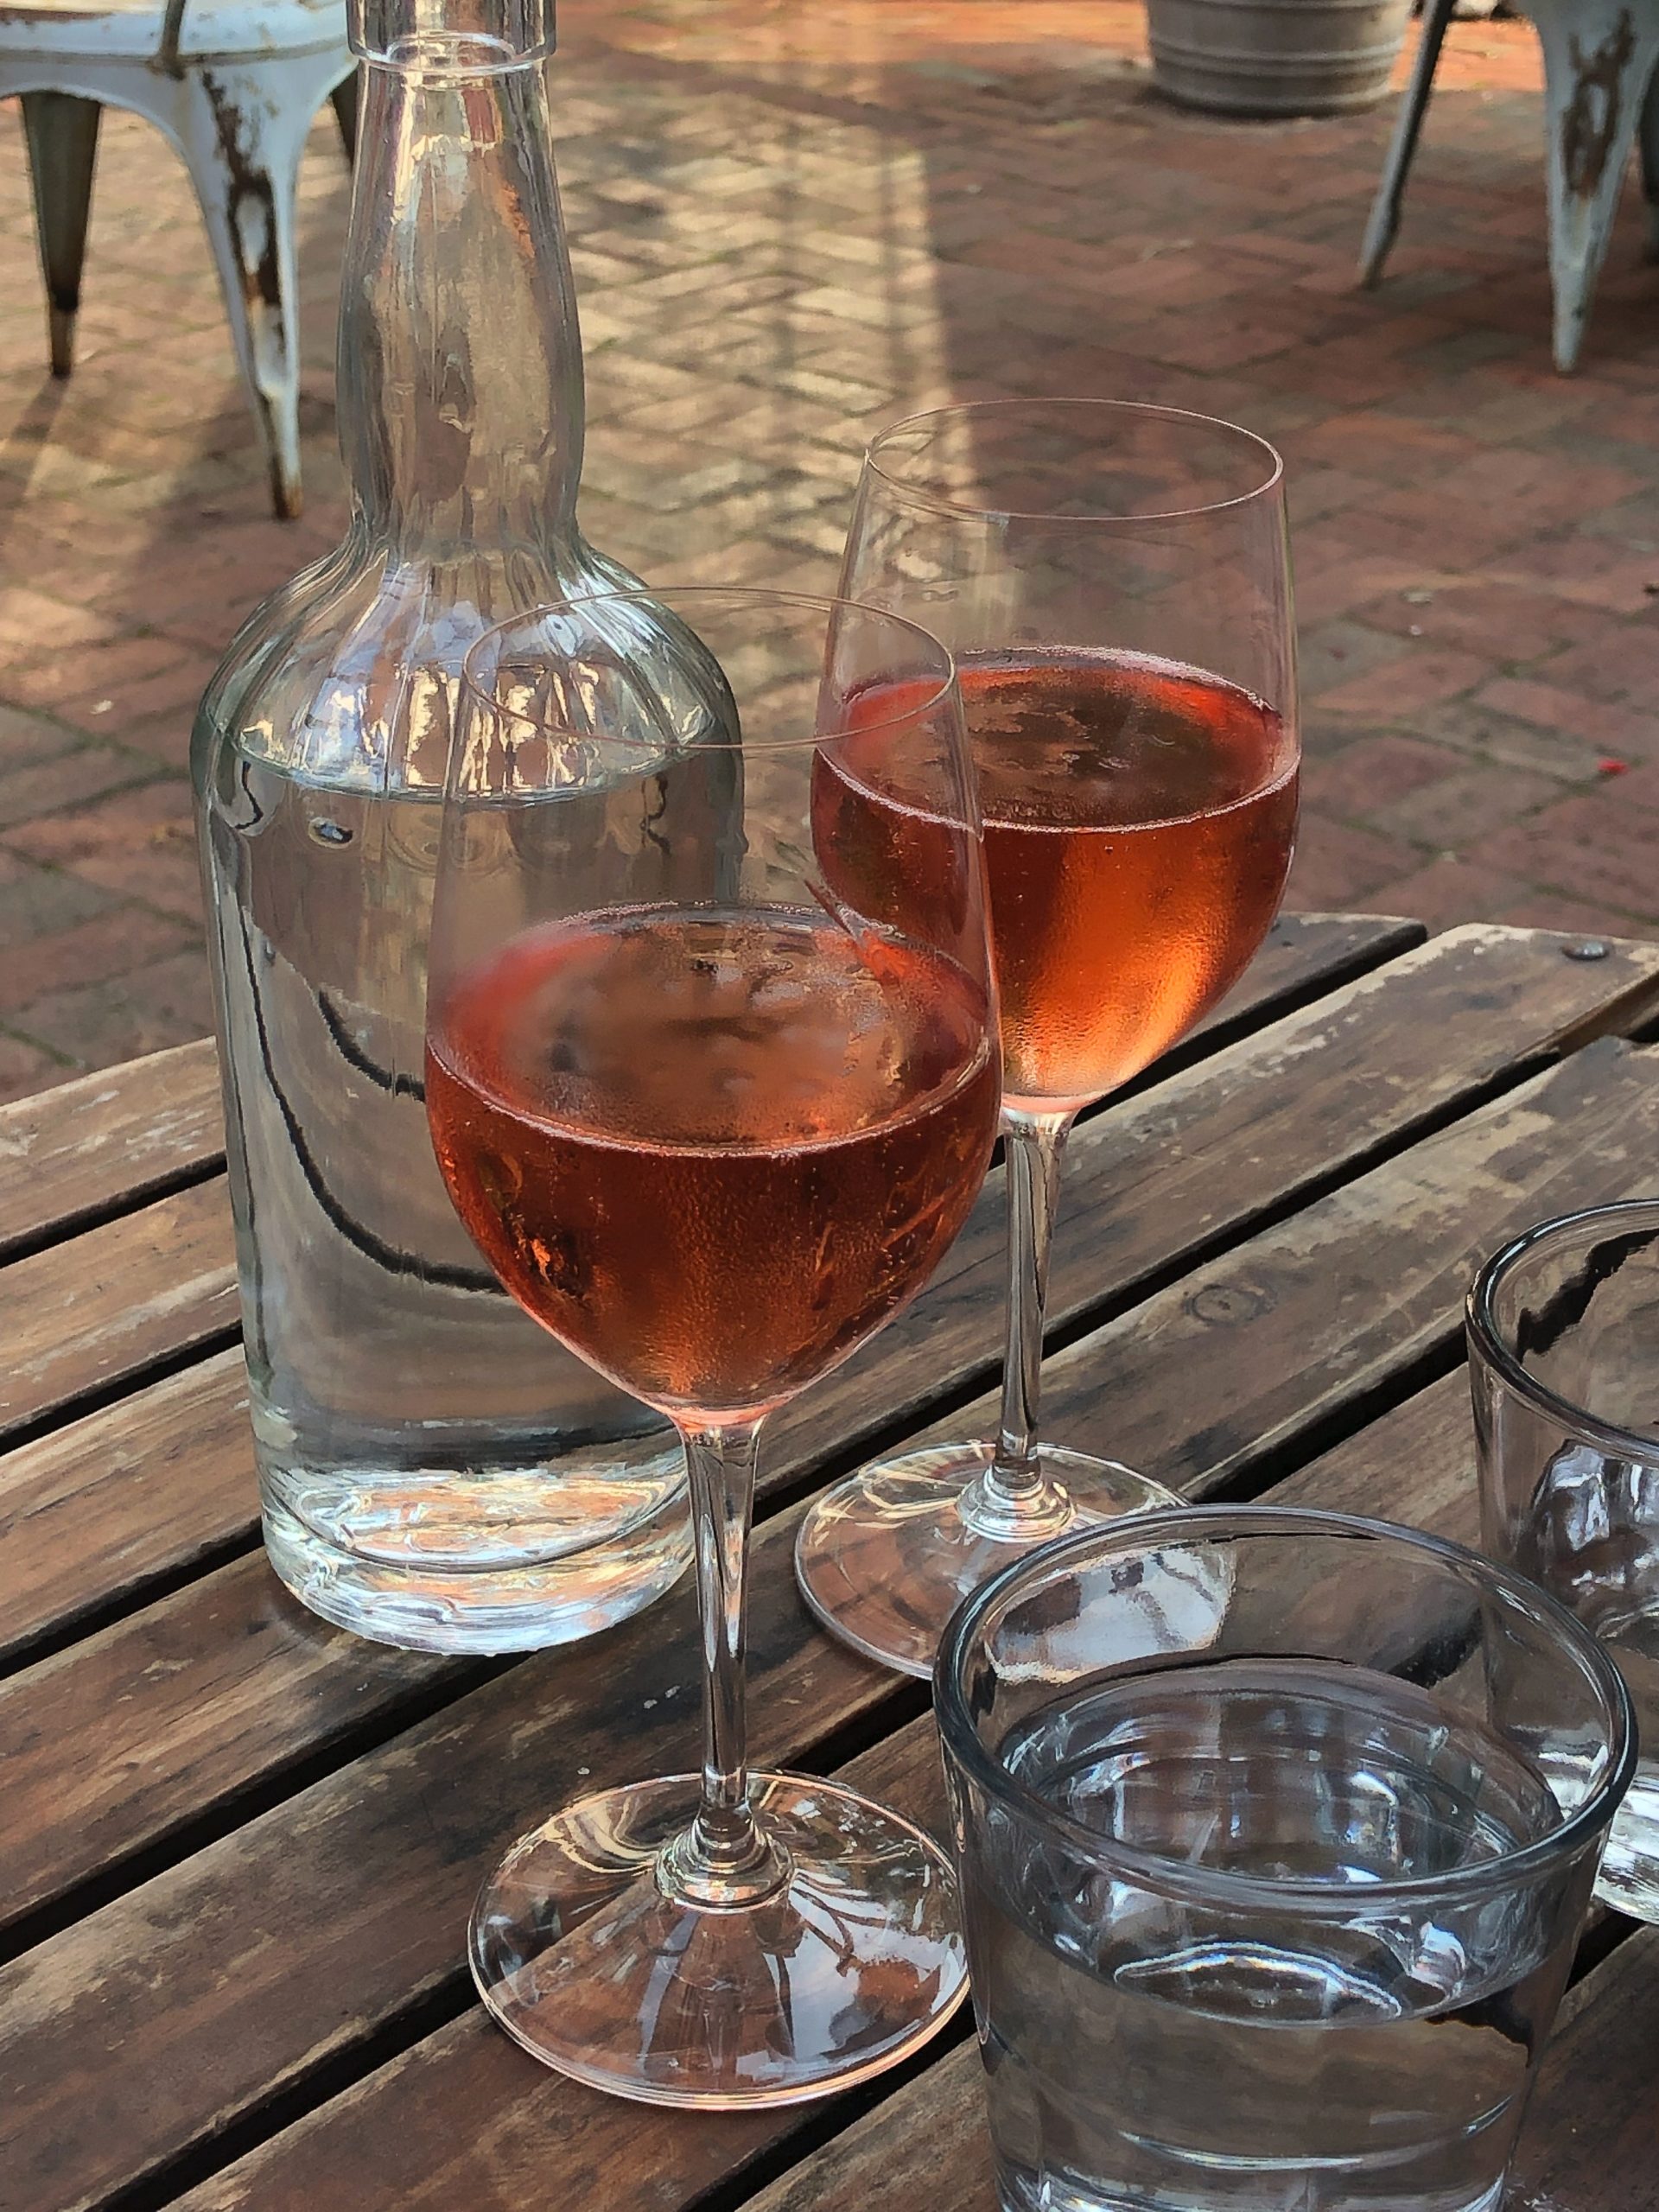 rose wine on wine glasses, and glasses of water on a wooden table outdoor